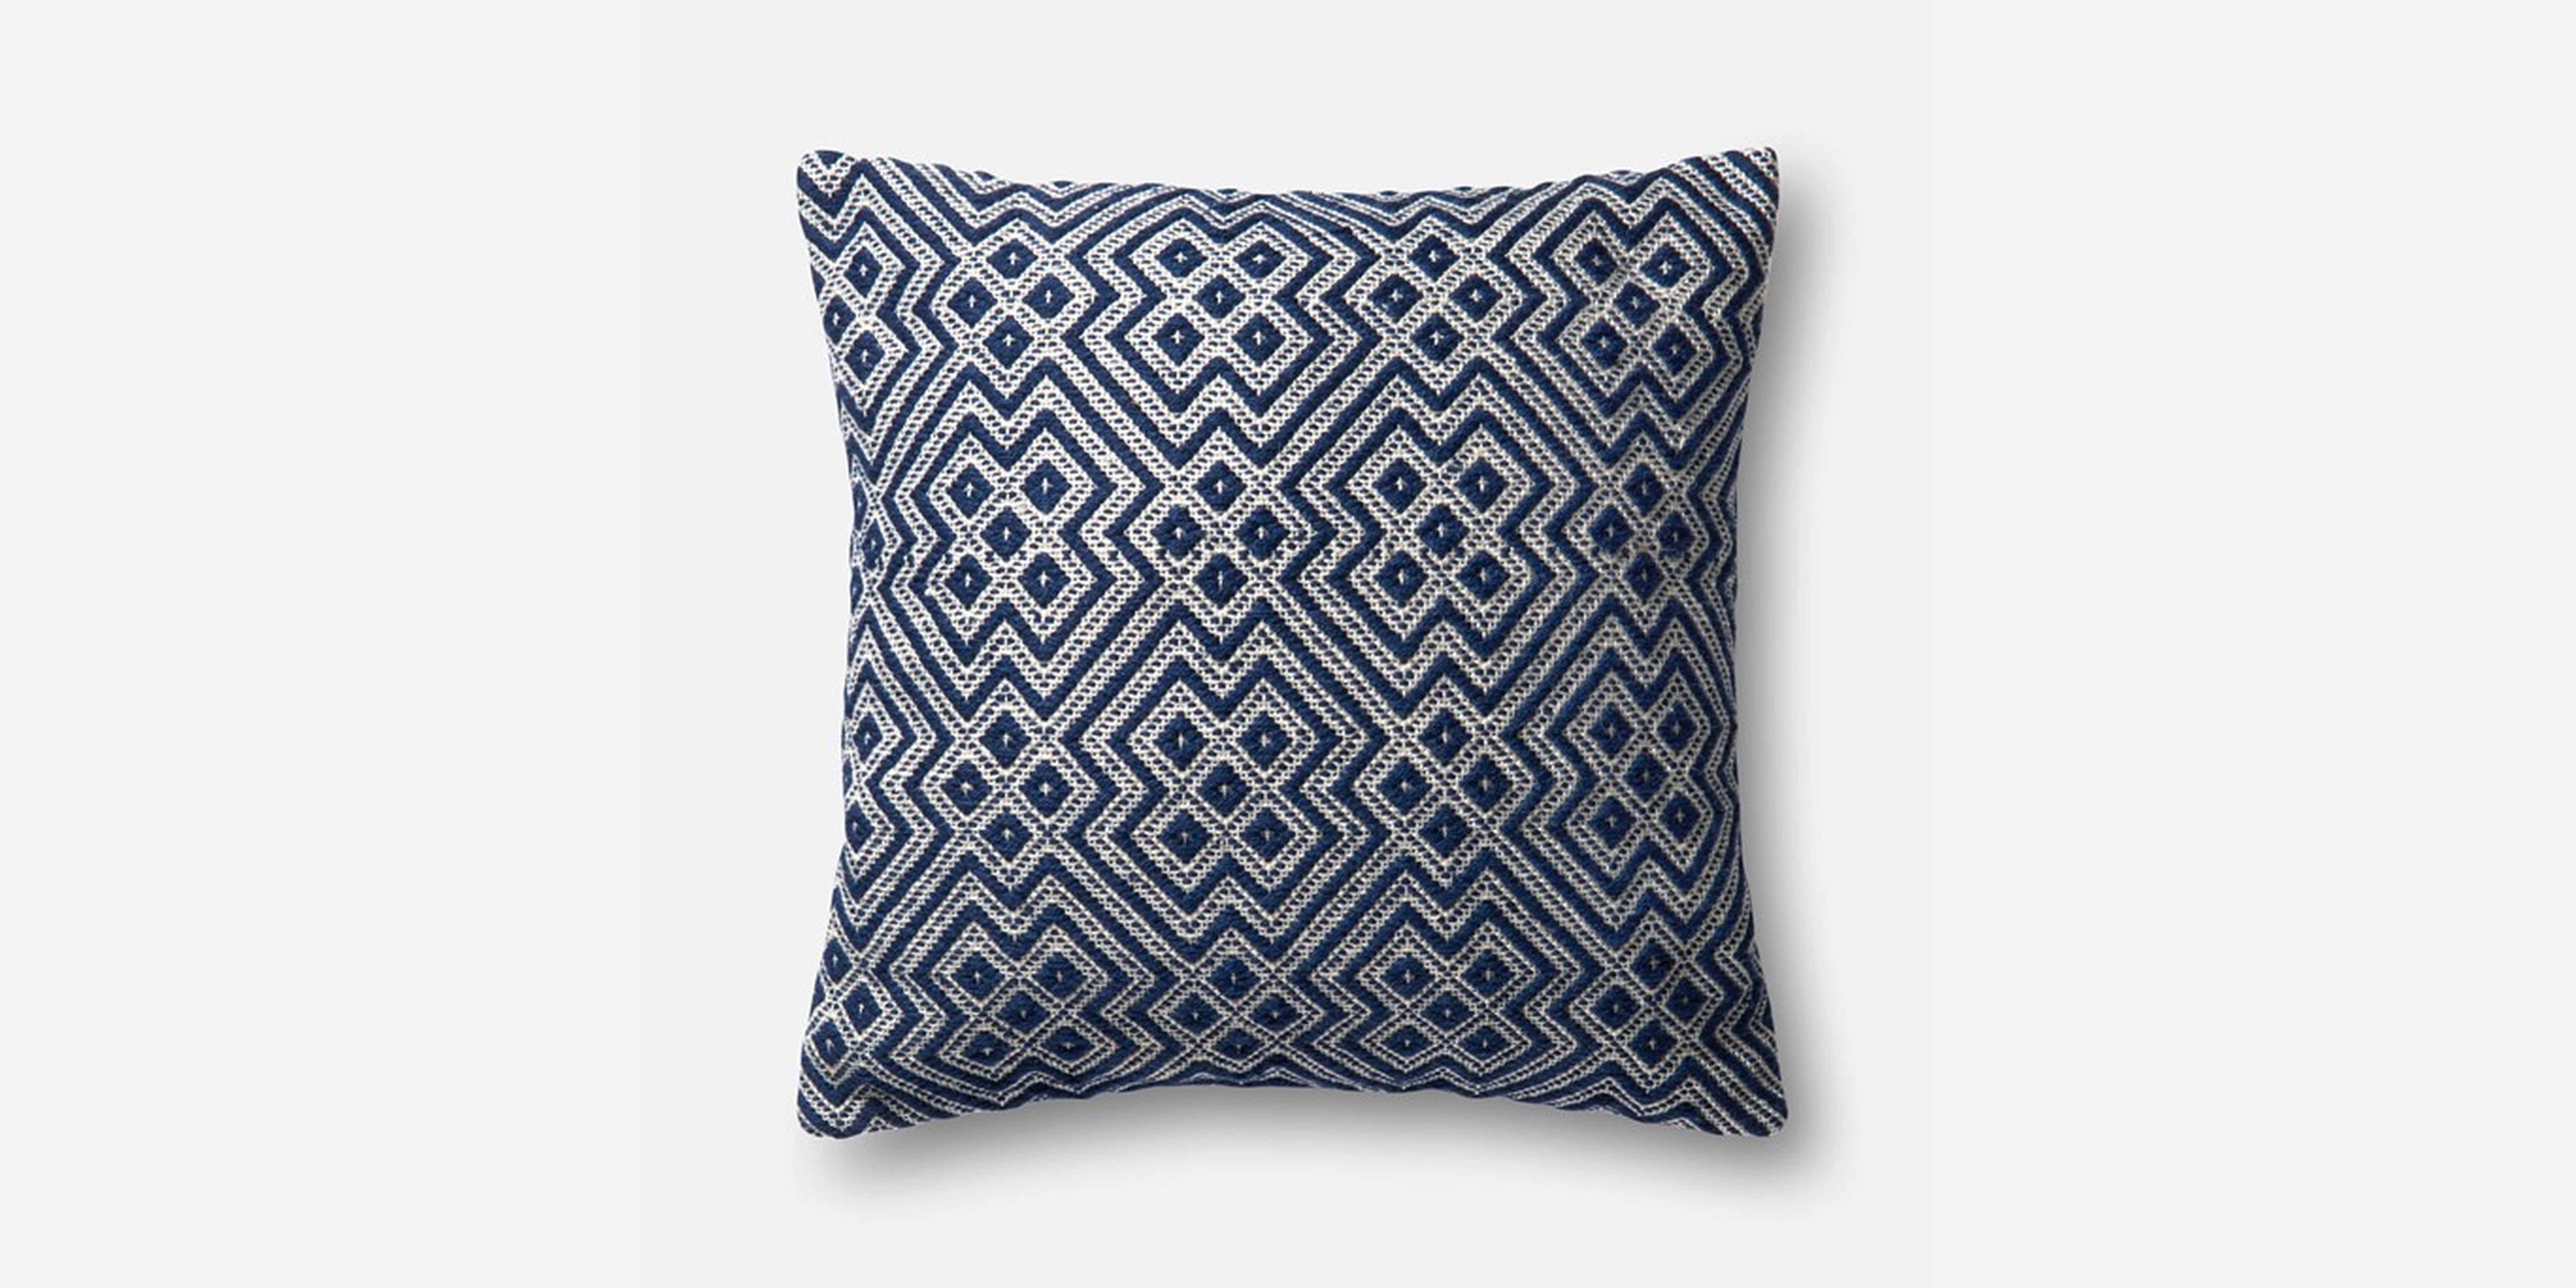 P0499 NAVY / WHITE Pillow - 22x22" with Poly insert - Loloi Rugs